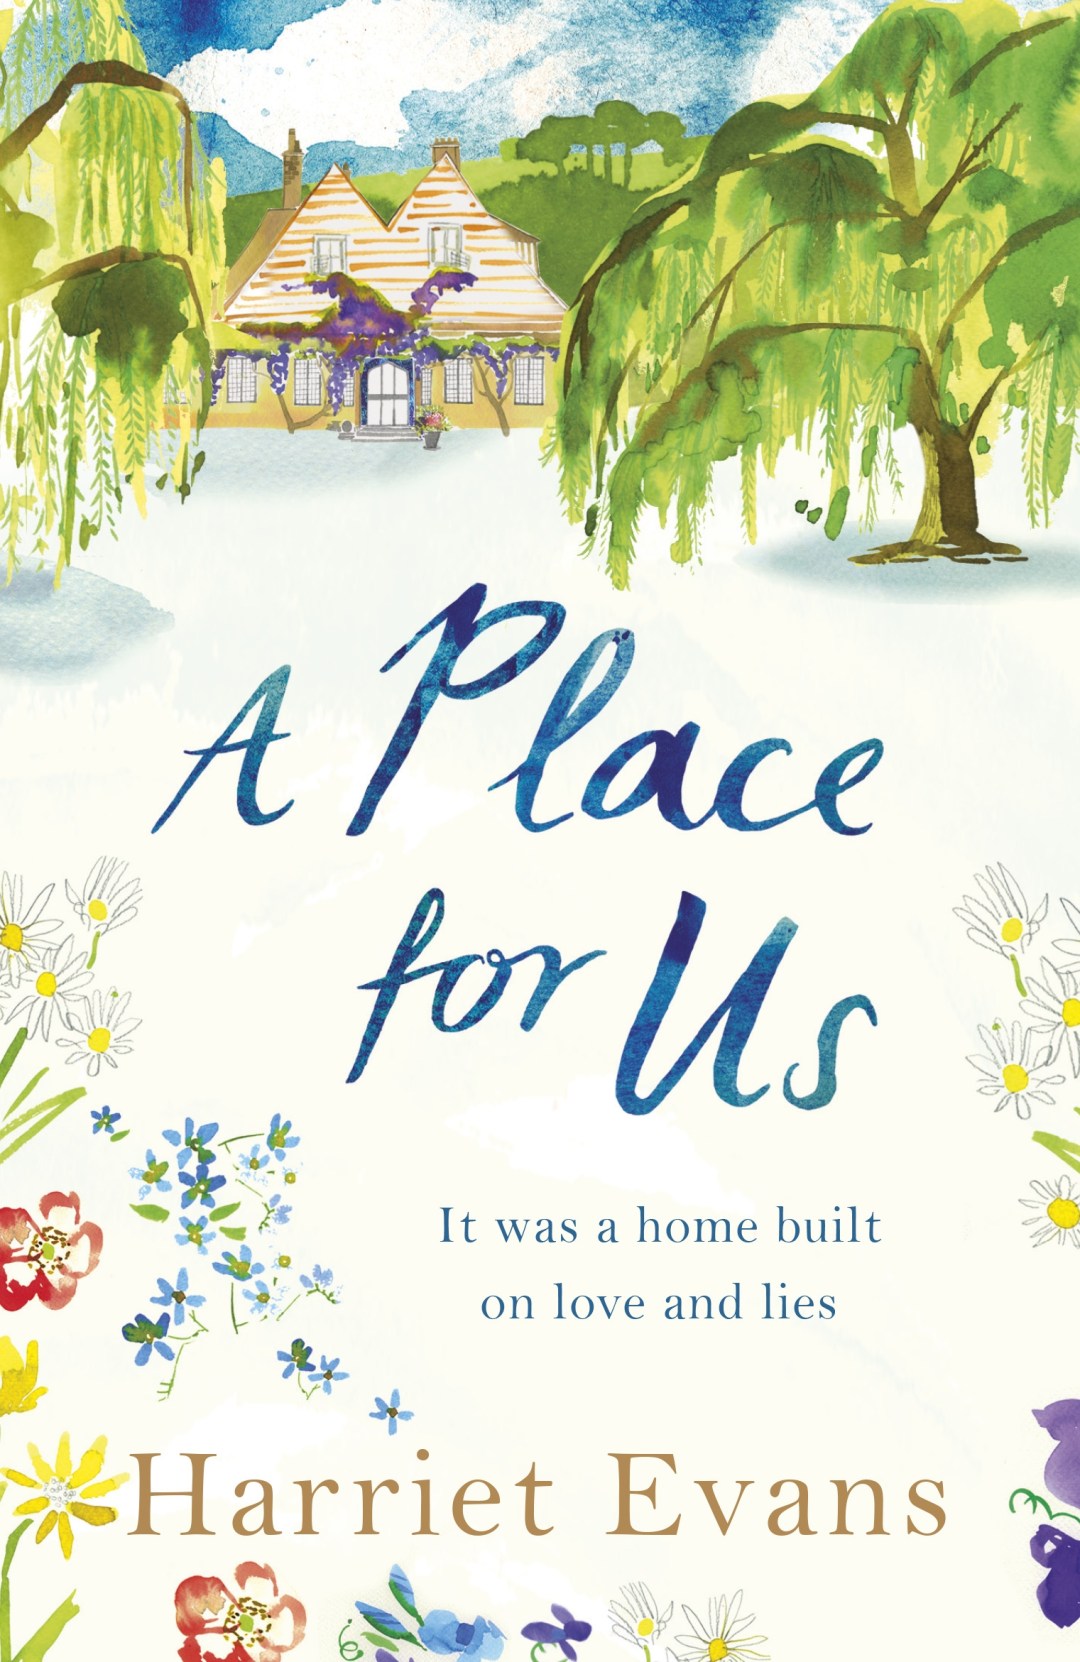 New Fiction: A Place For Us